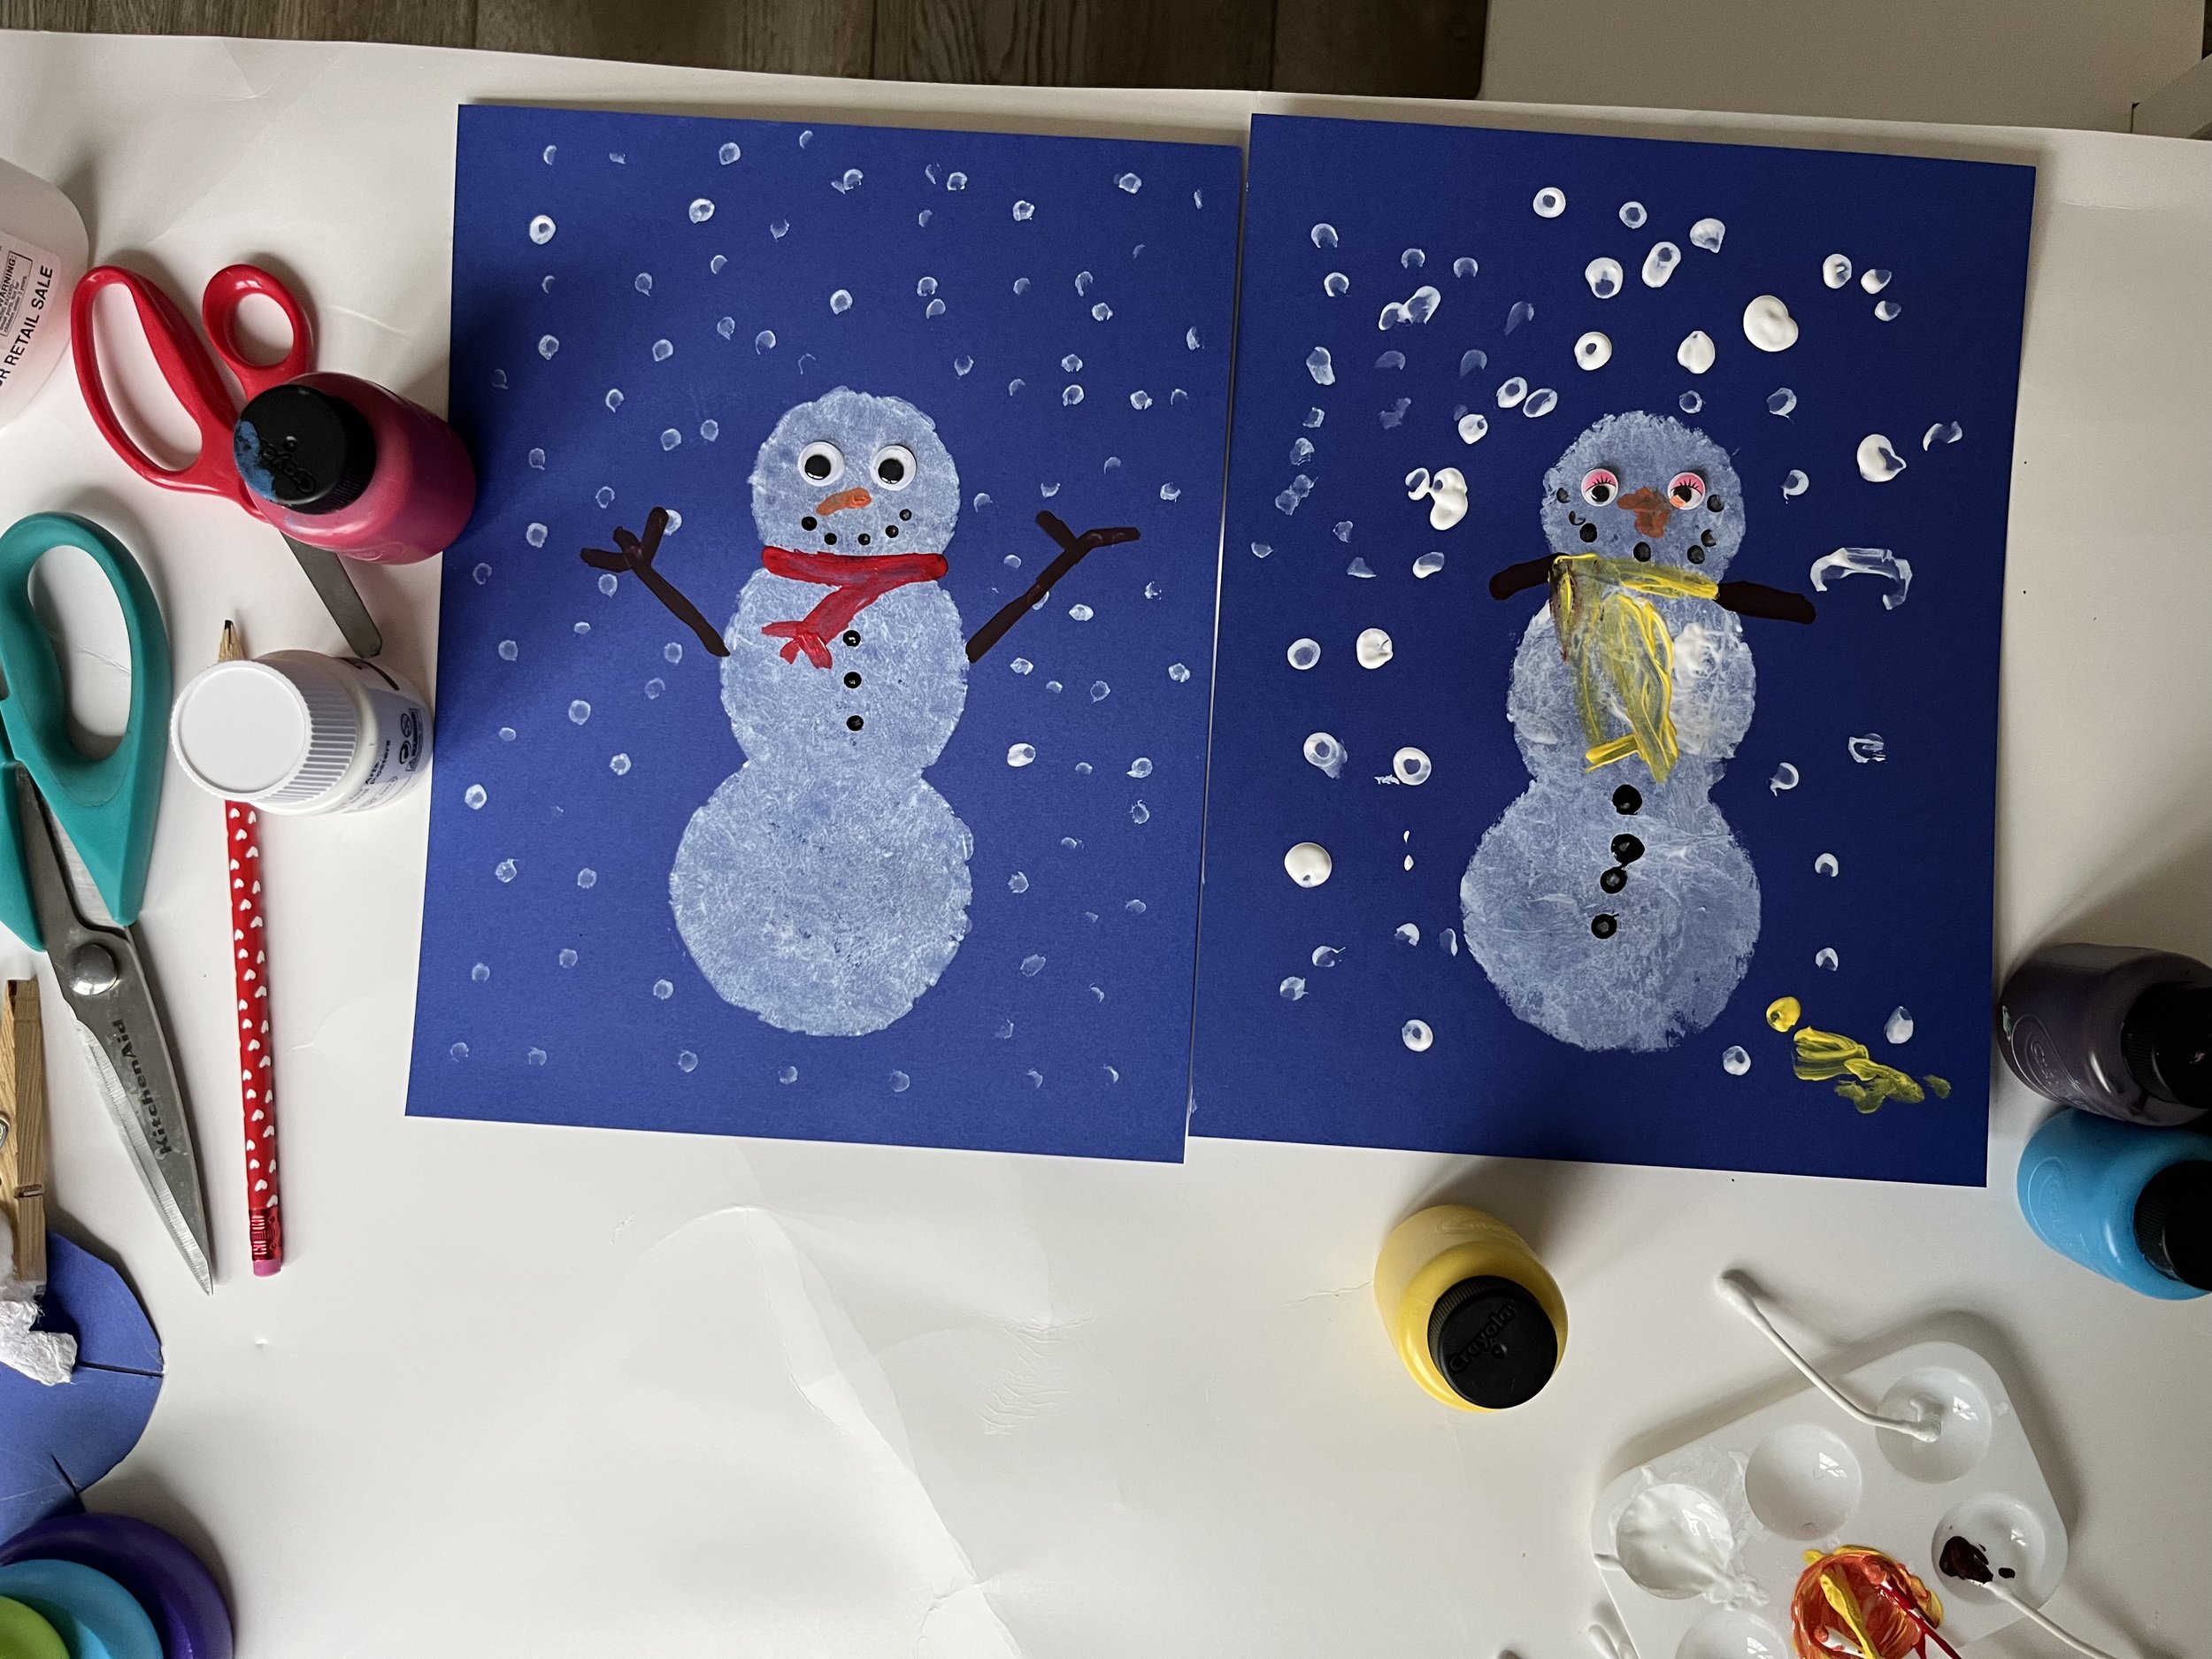 Cotton Ball Stamped Snowman Craft - Our Kid Things